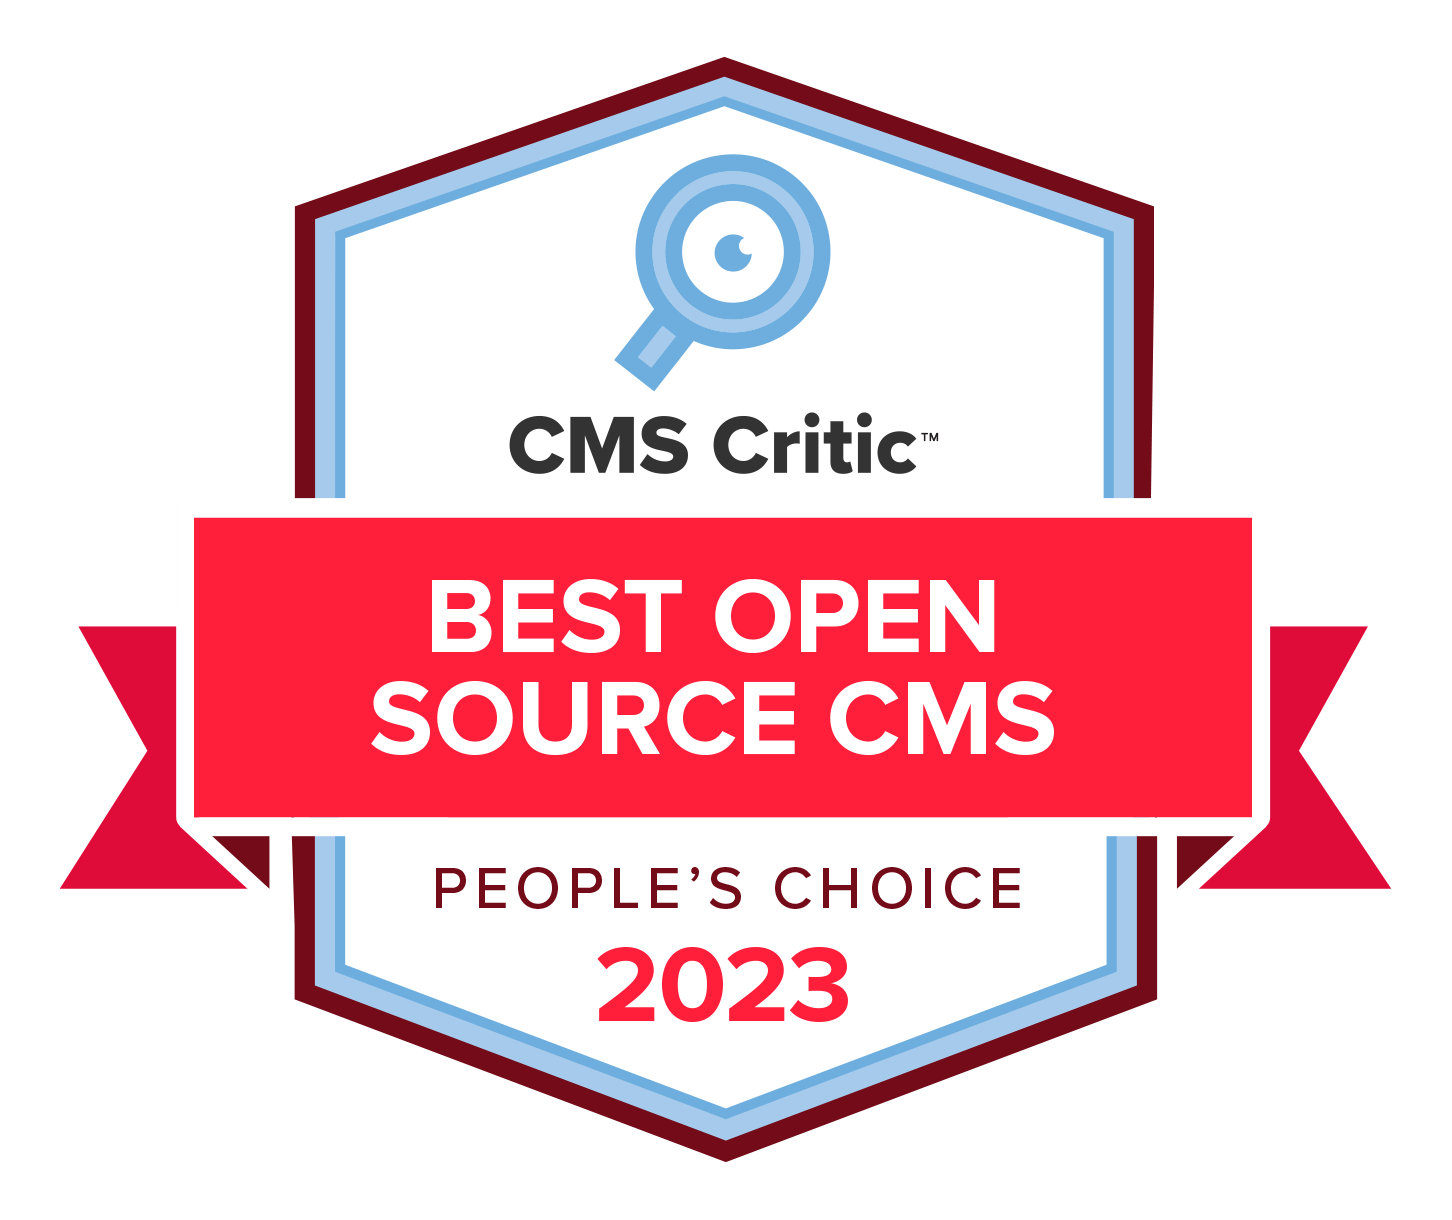 Umbraco won the “Best Open Source CMS” in 2023 CMS Critic People's Choice Award